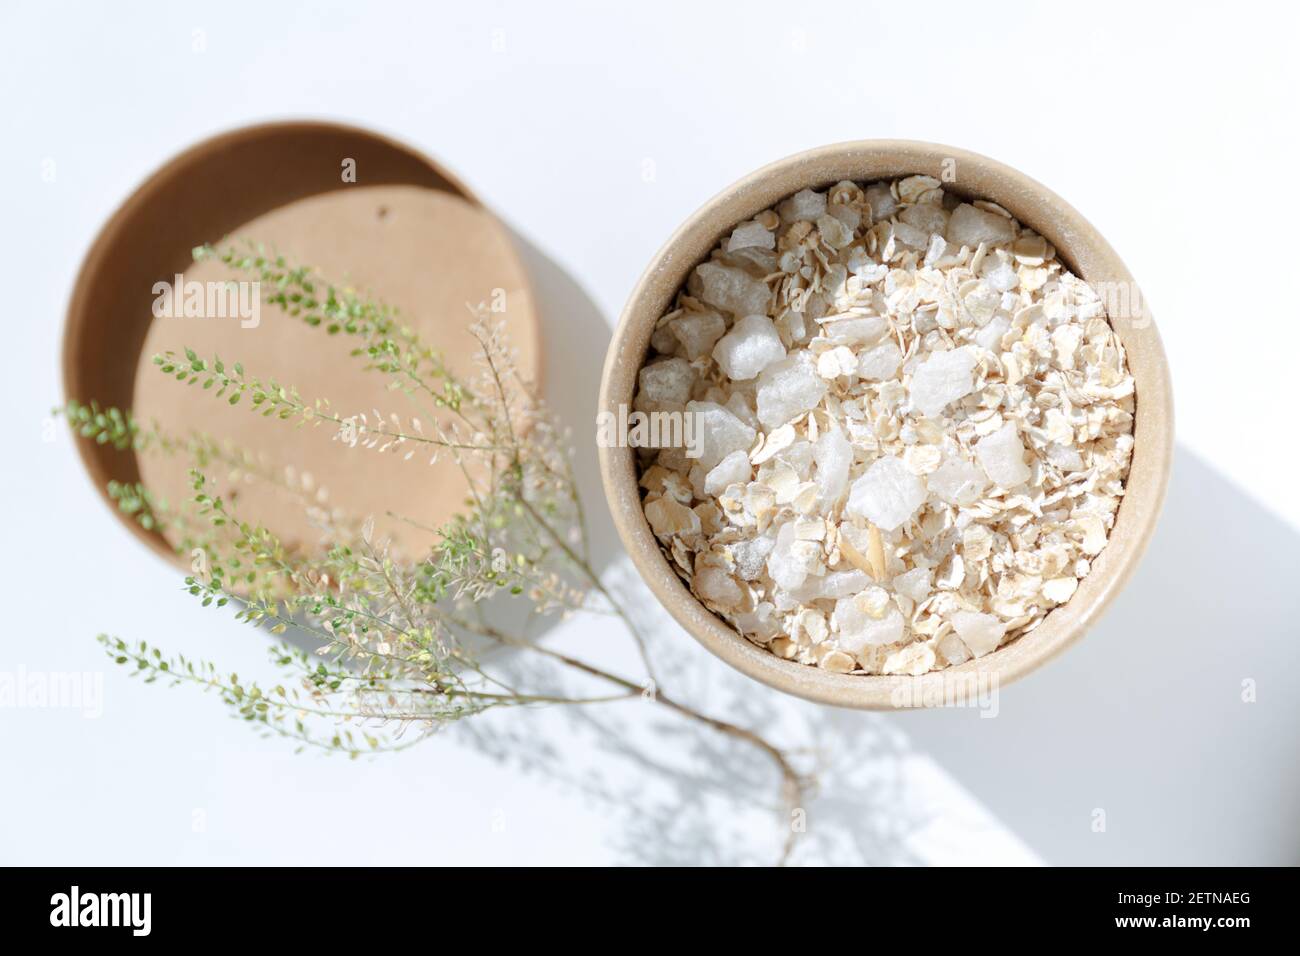 Cardboard jar with oatmeal and coarse sea salt close-up. Scrub the skin. Spa products for skin cleansing and relaxing bath on a white background with Stock Photo